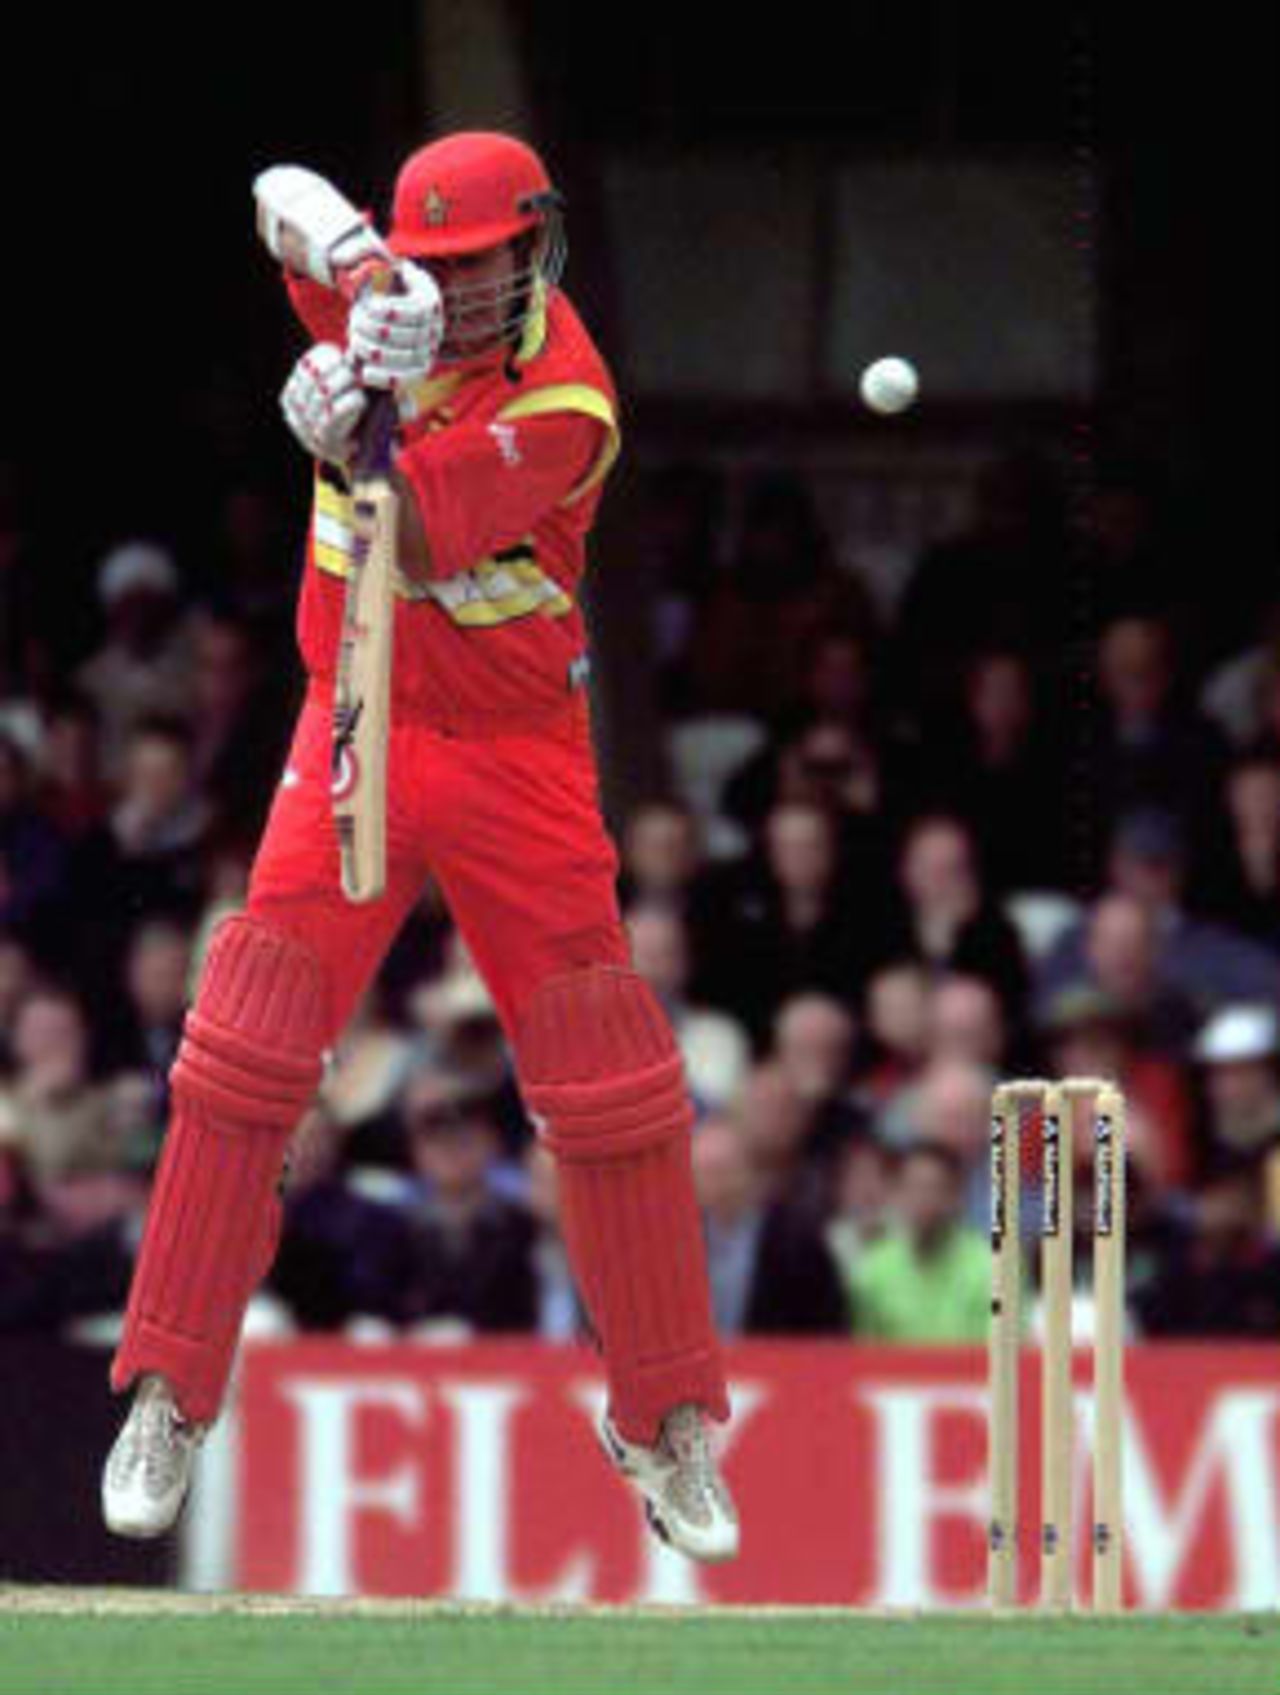 Zimbabwe opening batsman Neil Johnson takes evasive action against the ferocious bowling of Pakistan's Shoaib Akhtar during their Cricket World Cup Super Six match at The Oval in London 11 June 1999